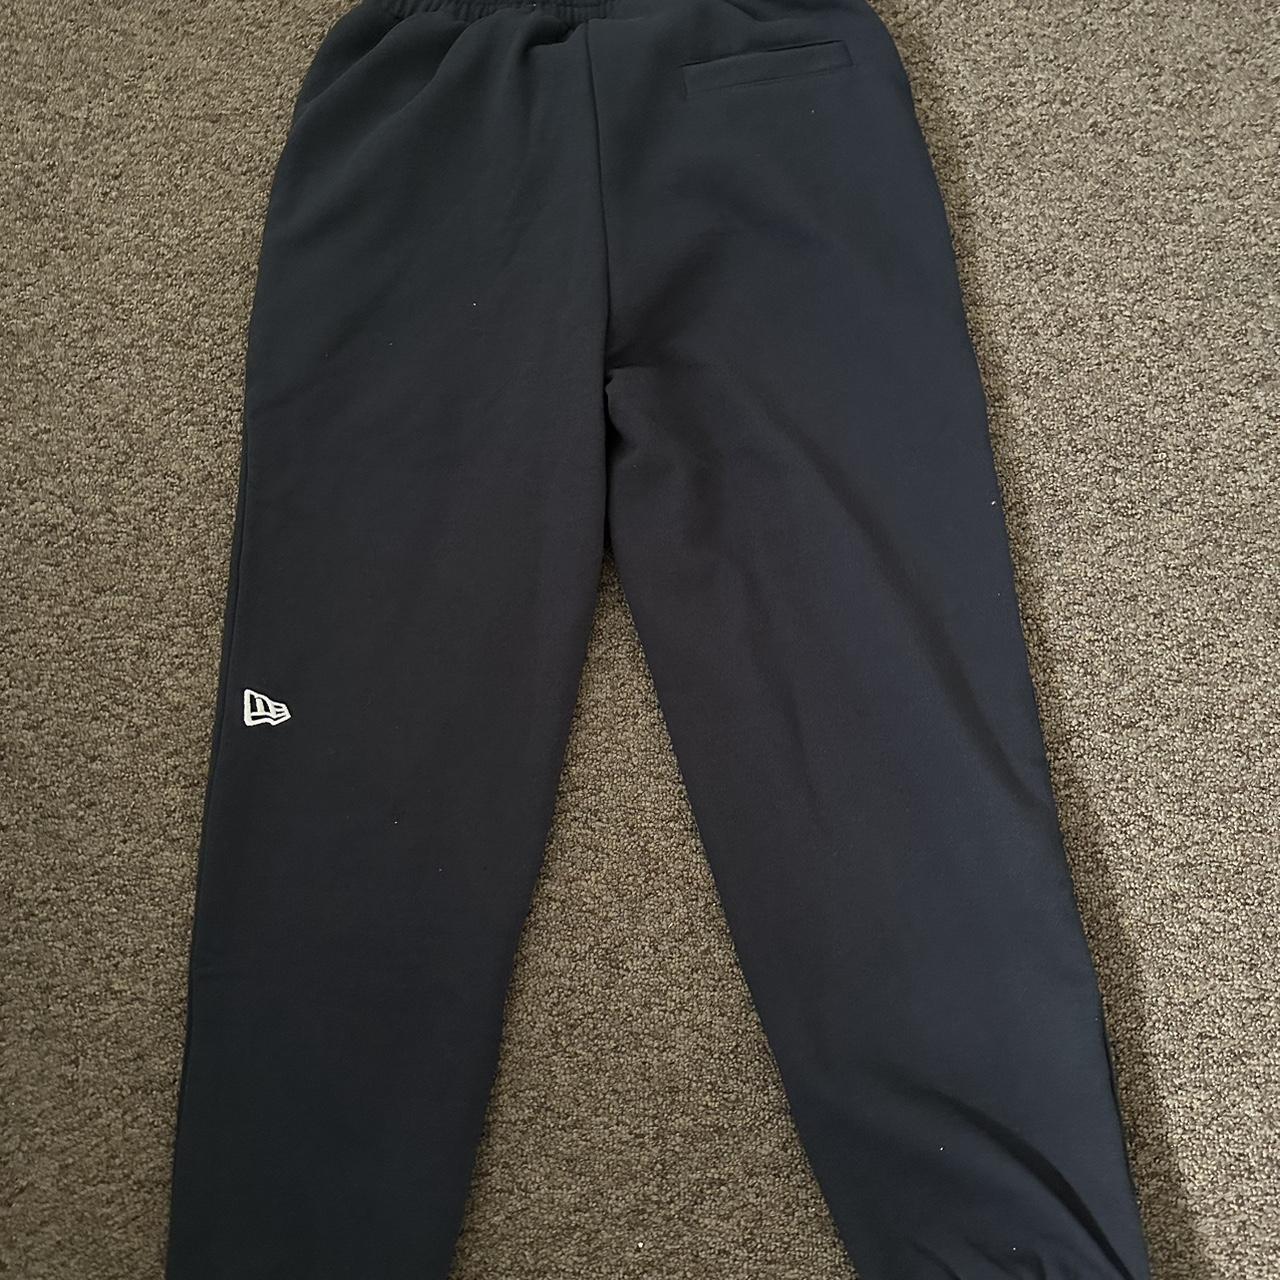 Eric Emmanuel Navy blue Sweats They are in overall... - Depop